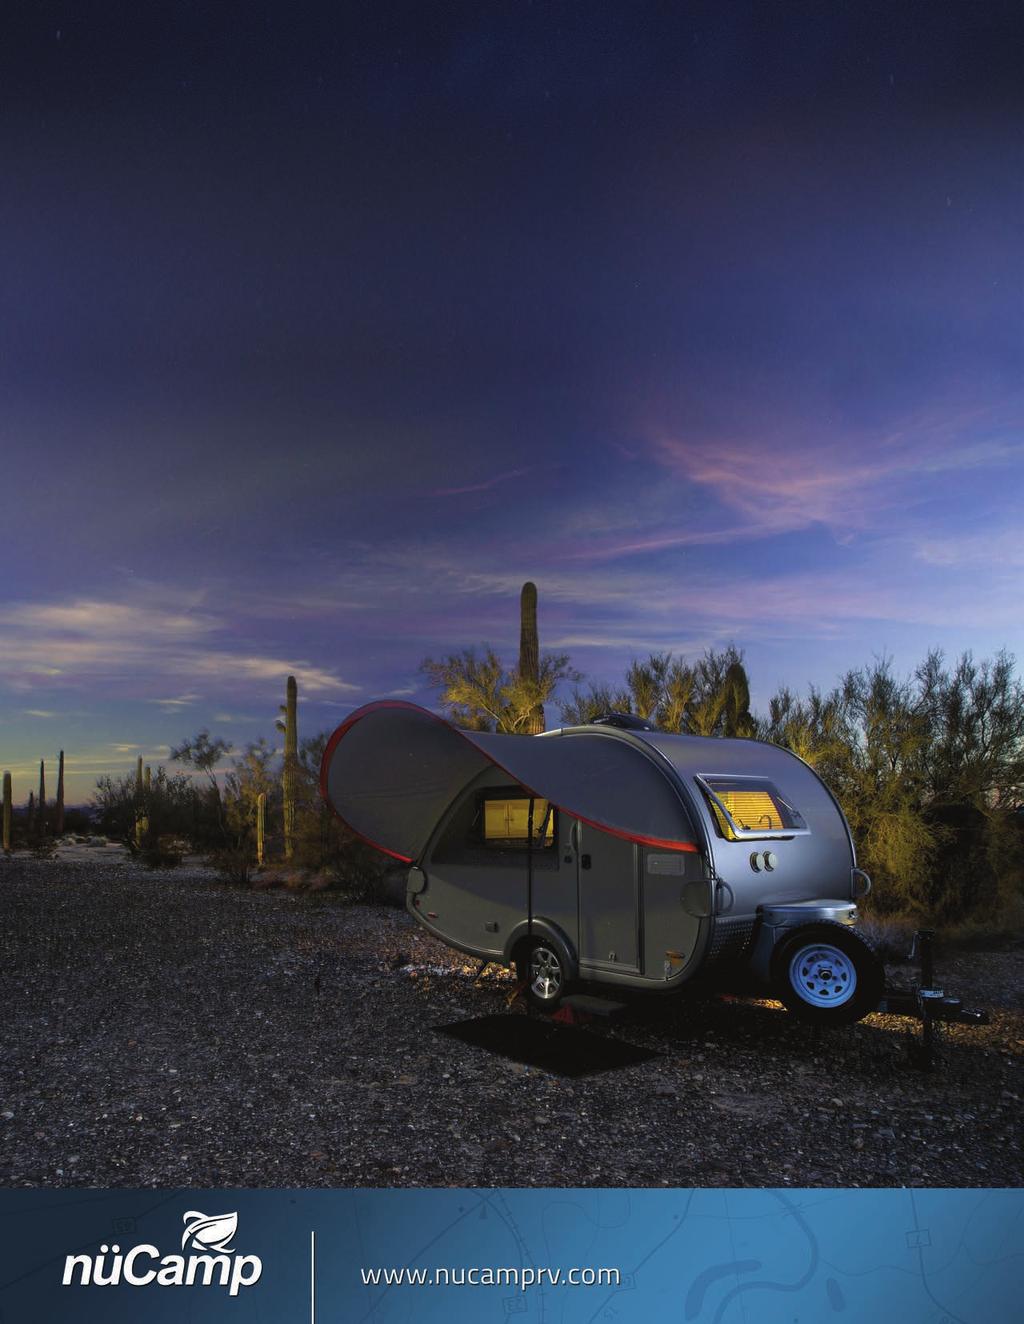 nücamp RV manufactures the highest quality recreational vehicles and truck campers available in North America.